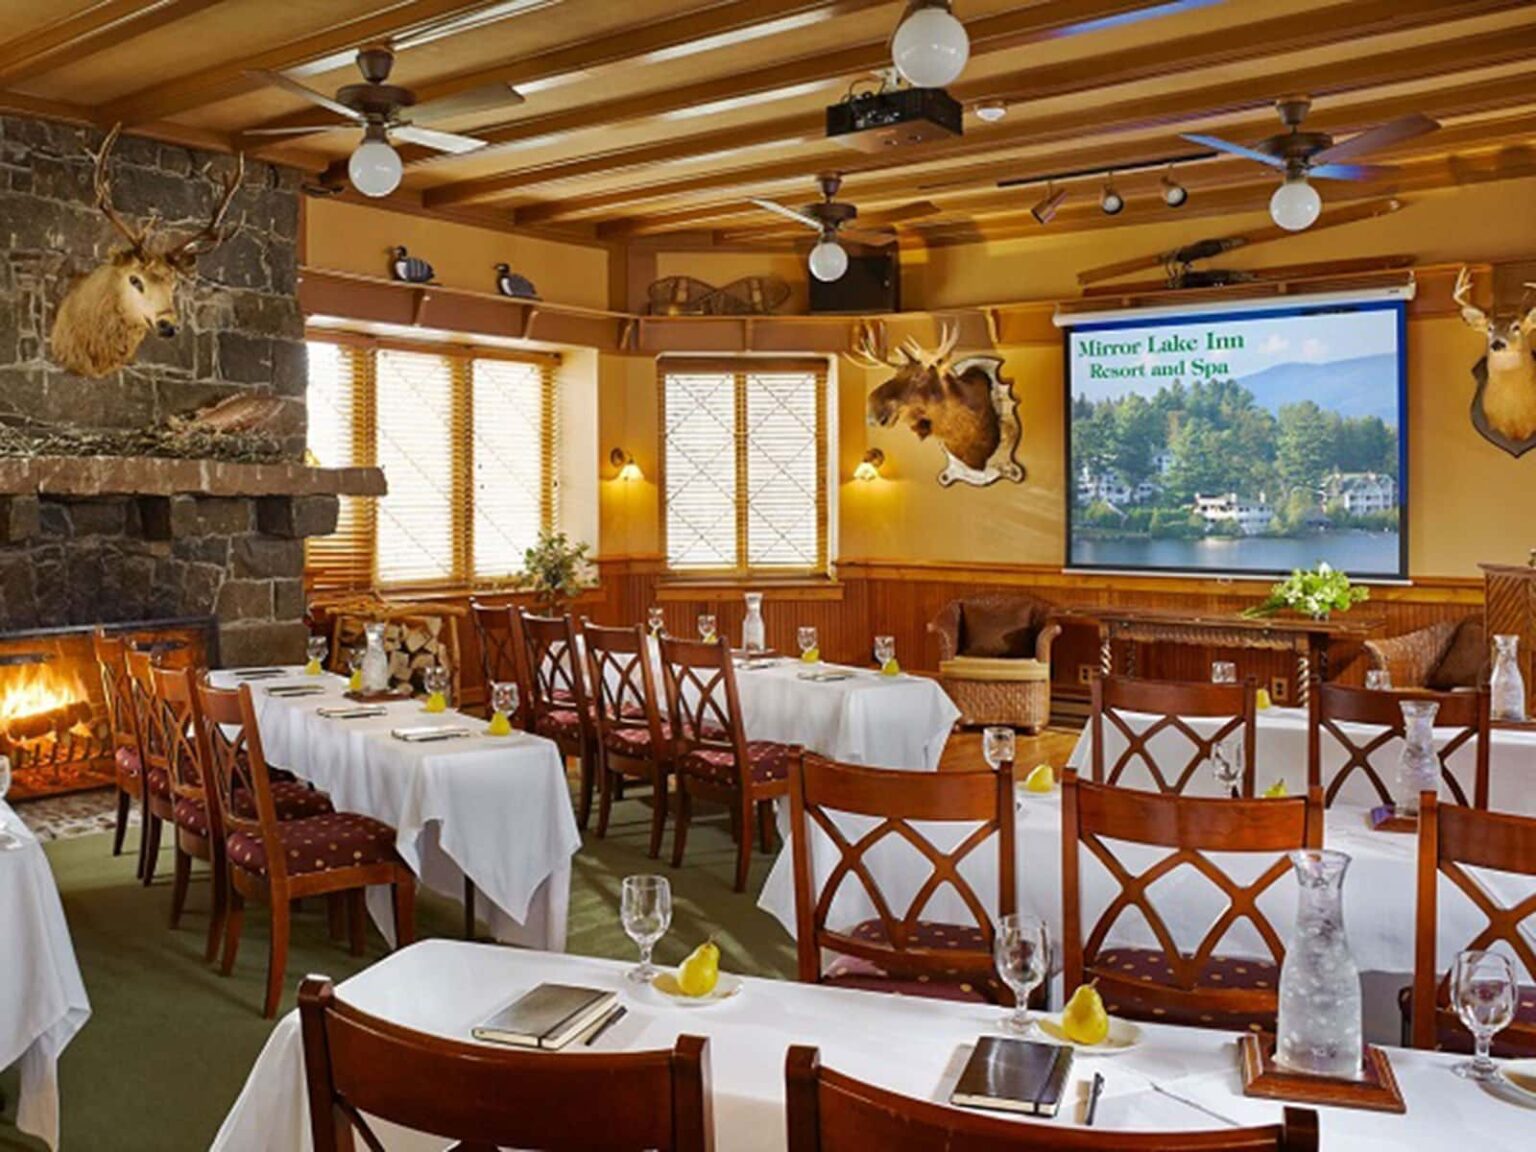 Adirondack Conference Center at Mirror Lake Inn set for an event